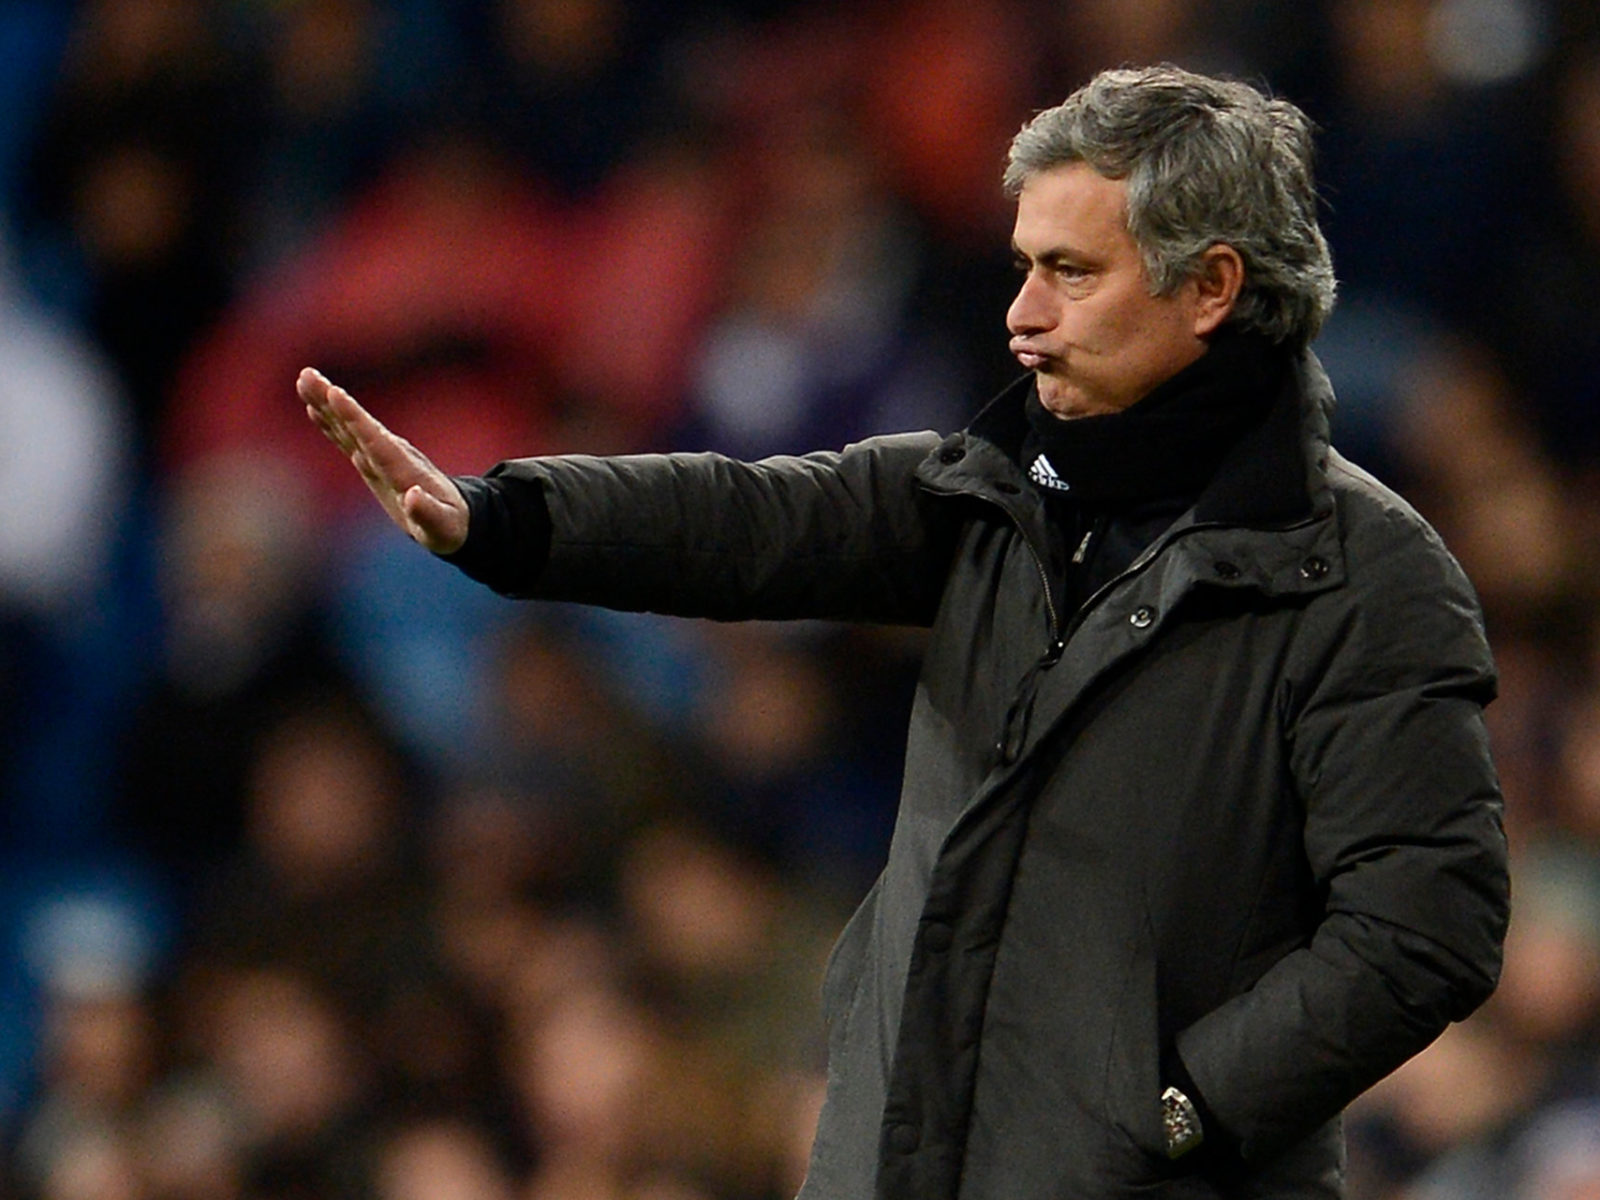 Mourinho has positioned his teams effectively through tactics and motivation